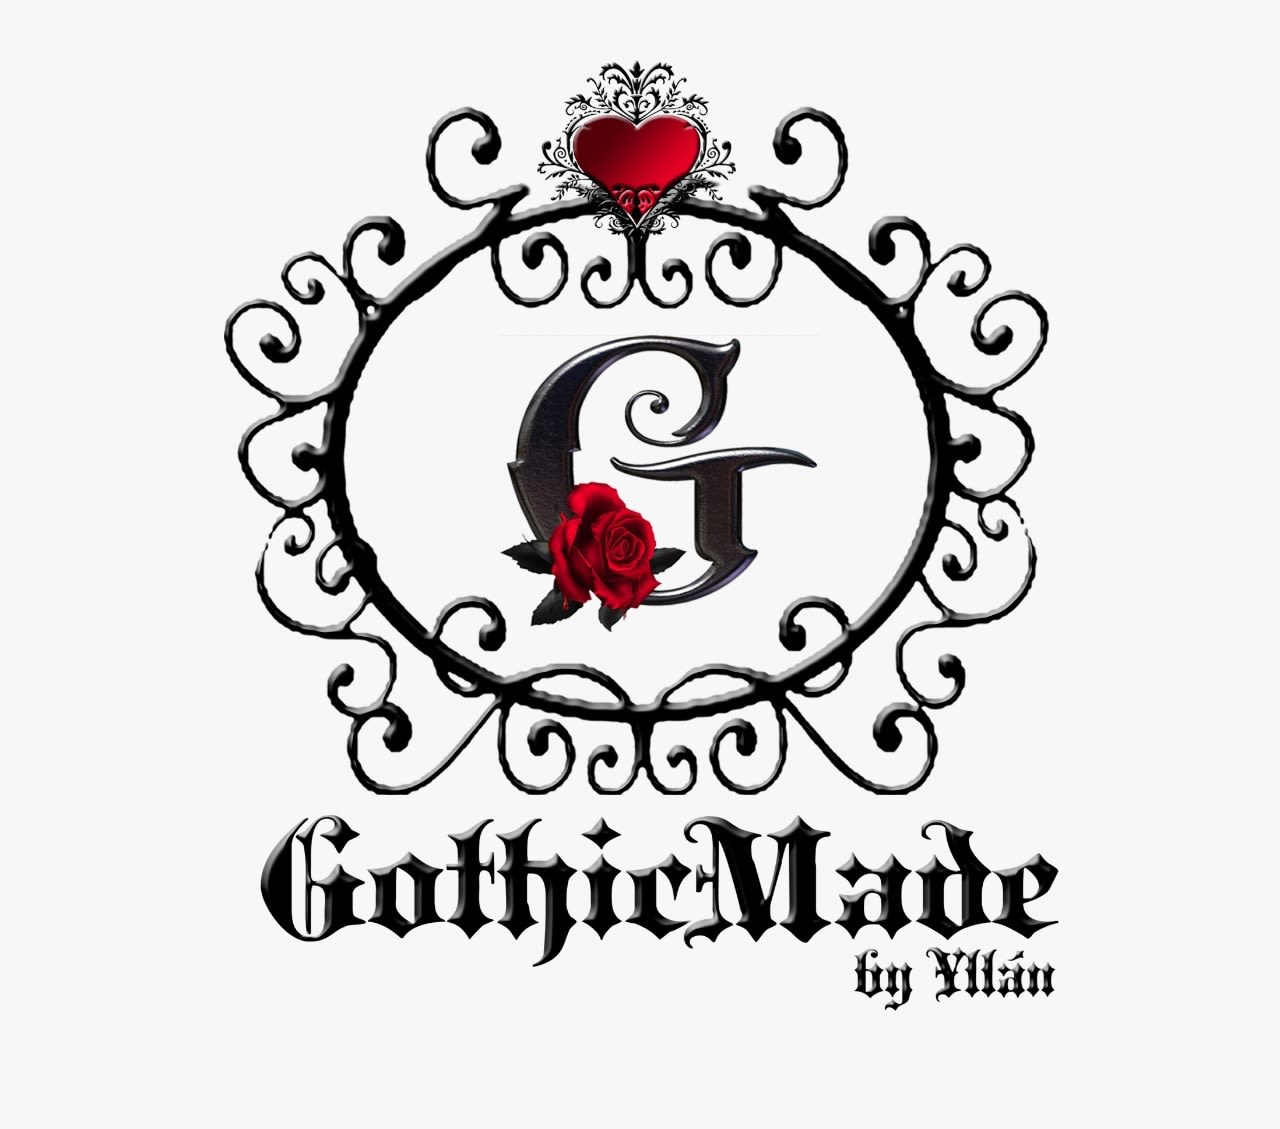 Gothic made by Yllan